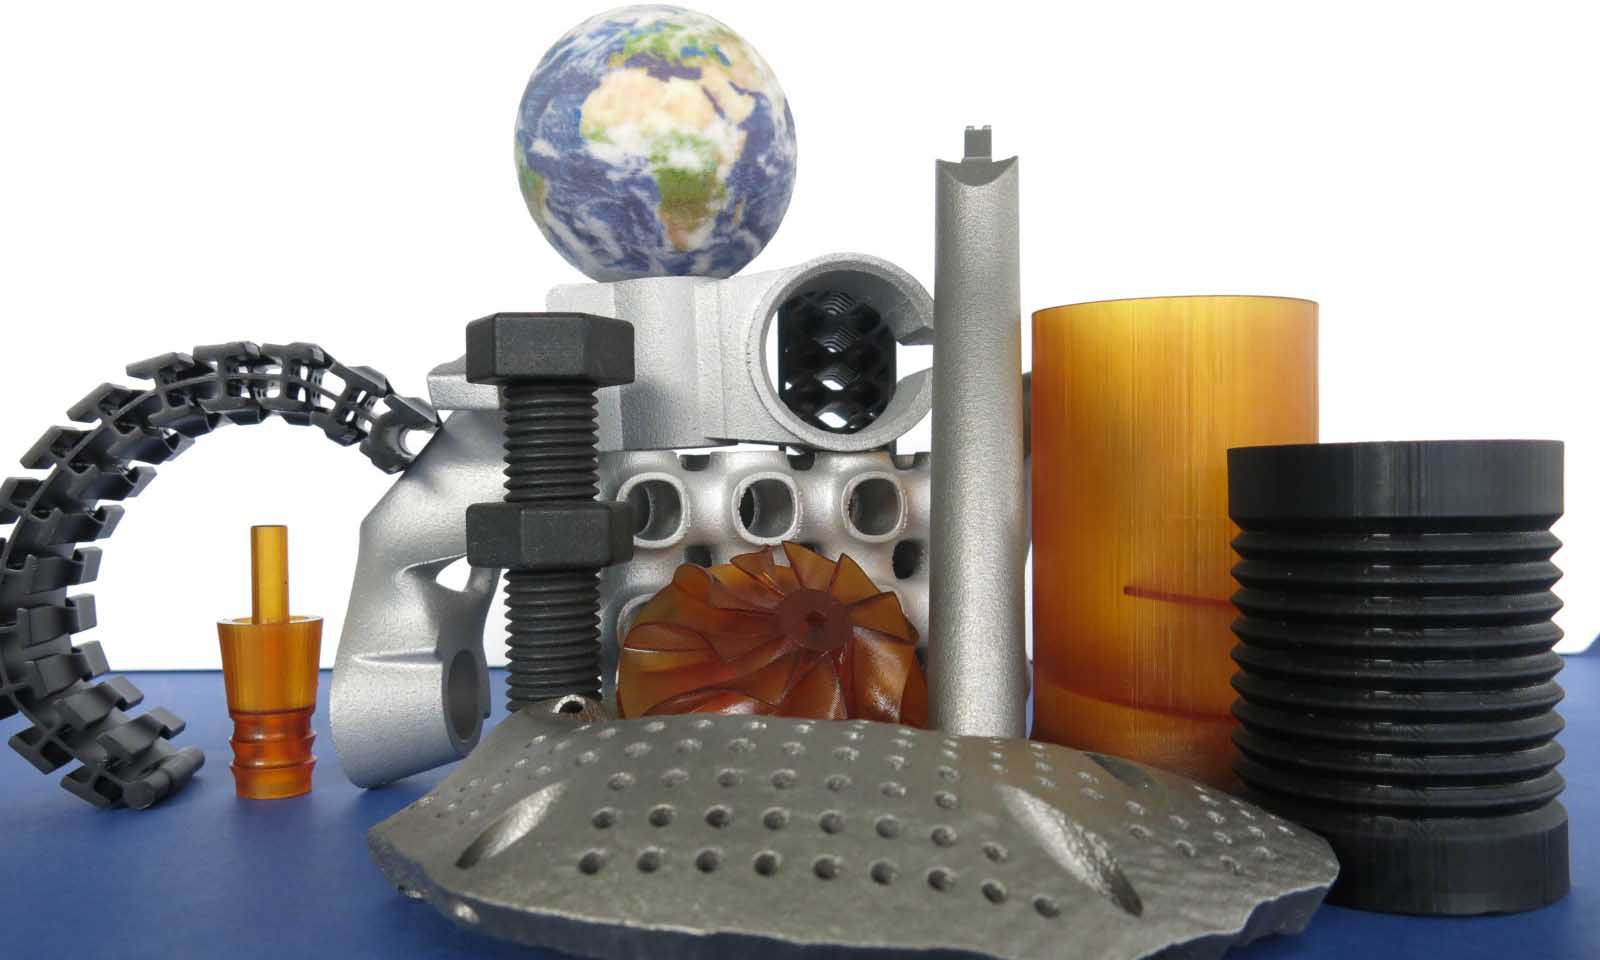 3D Printing Materials: Our Focus on Material Simulation.